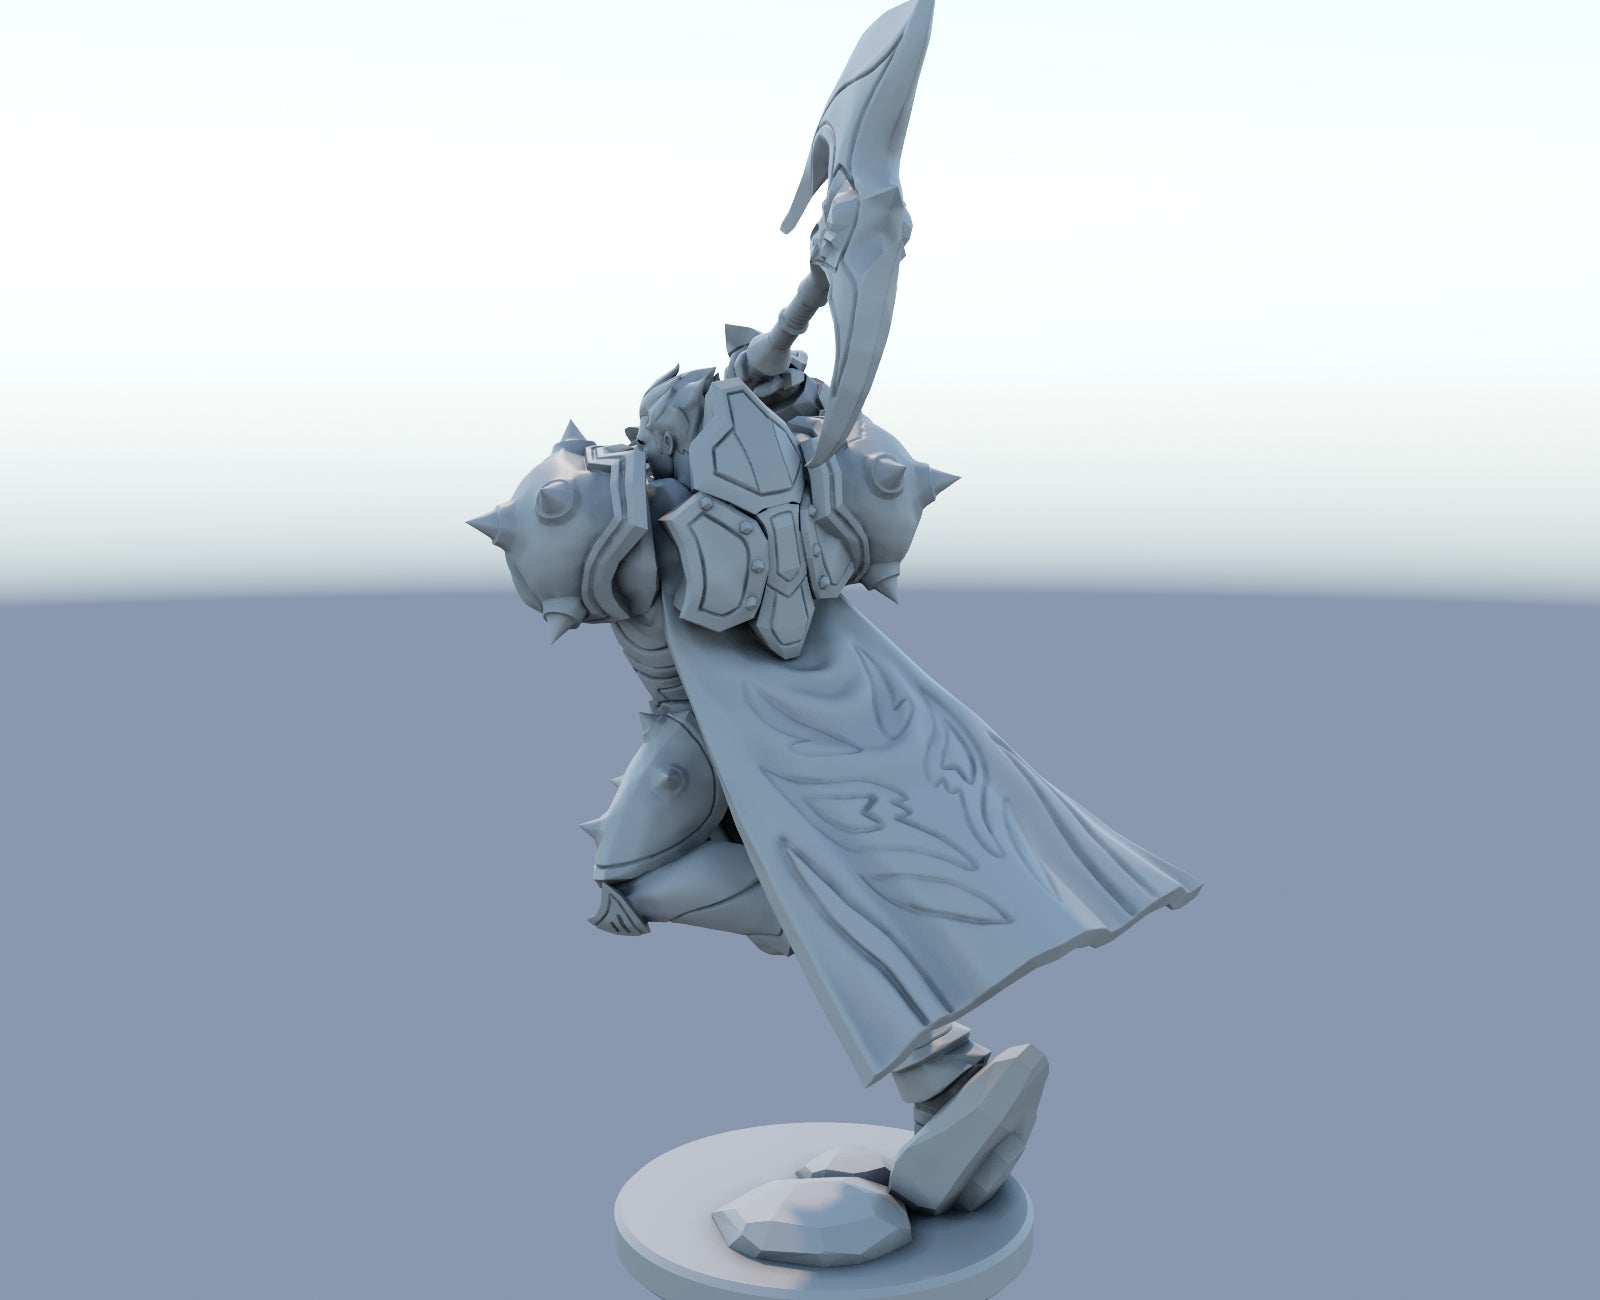 Darius 3D-printed League of Legends champion figure. Decorate your gaming setup or home with your favorite League of Legends champion! Choose between the unpainted version, perfect for you to paint yourself, or the hand-painted version by a professional painter. Order your figure today!